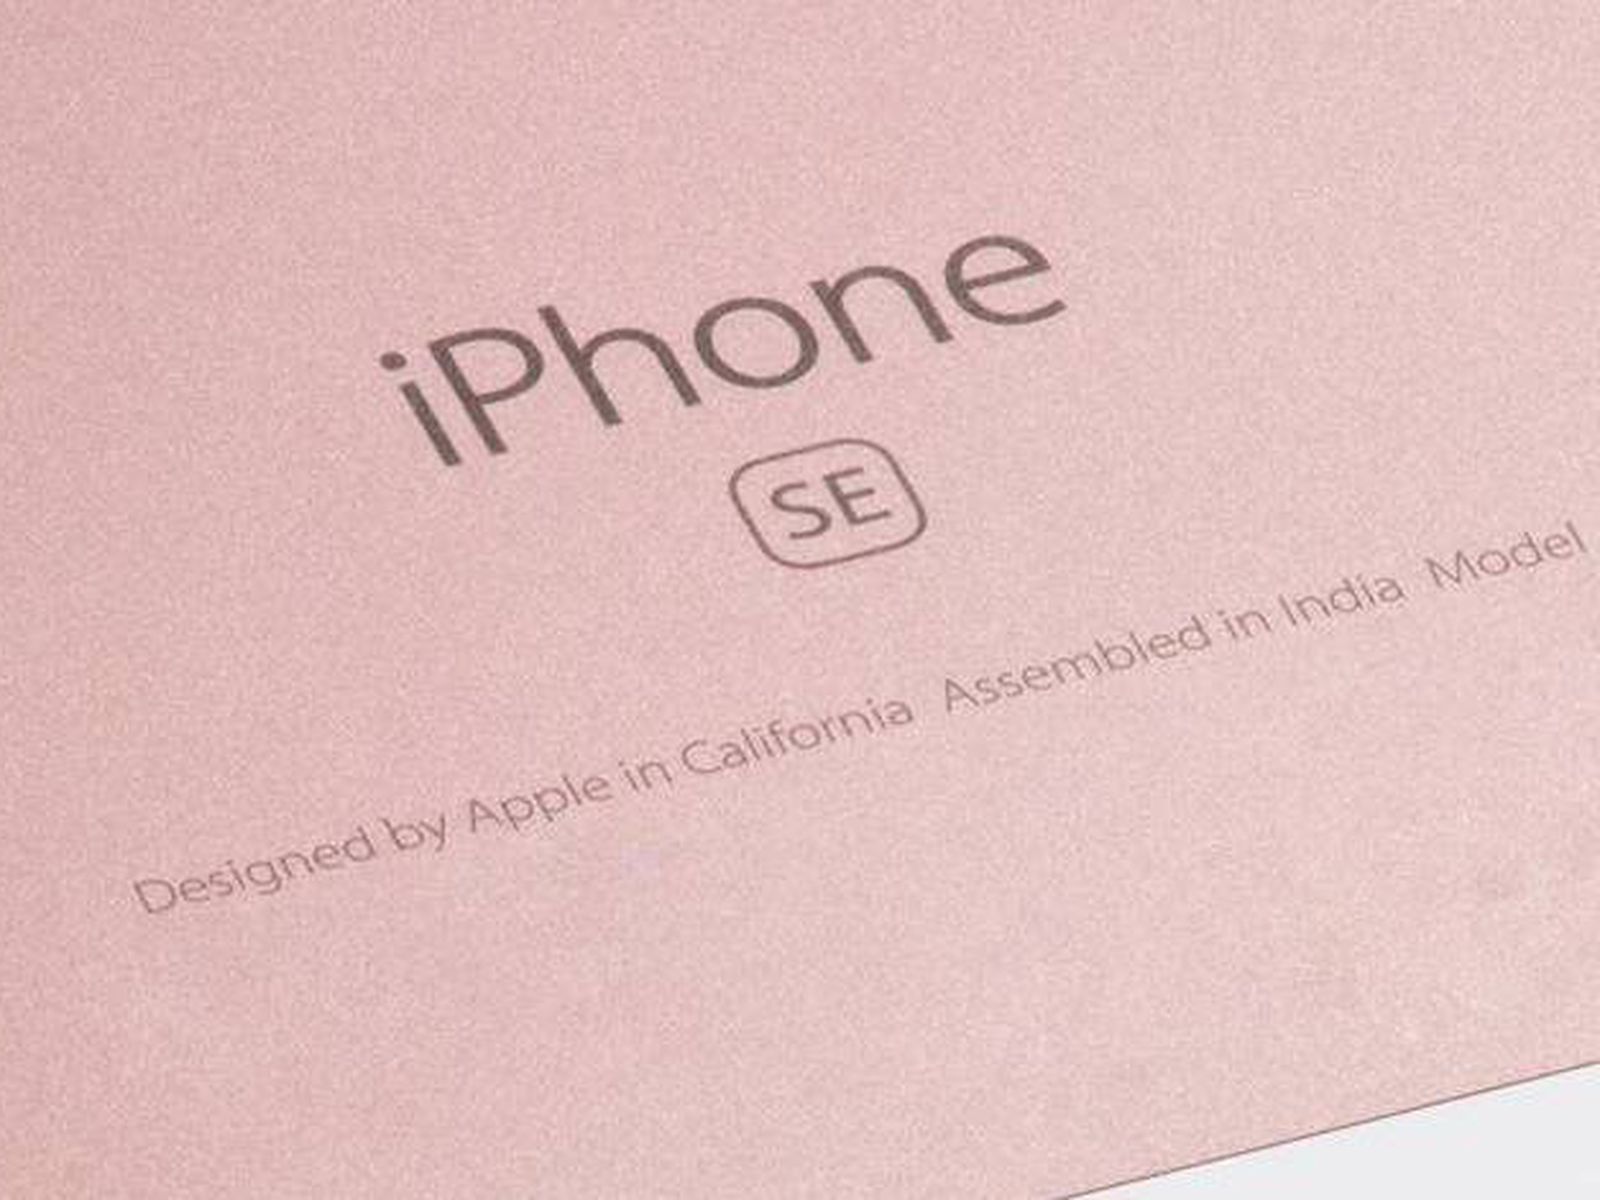 First Run of 'Assembled in India' iPhone SE Models Appear in Bangalore -  MacRumors